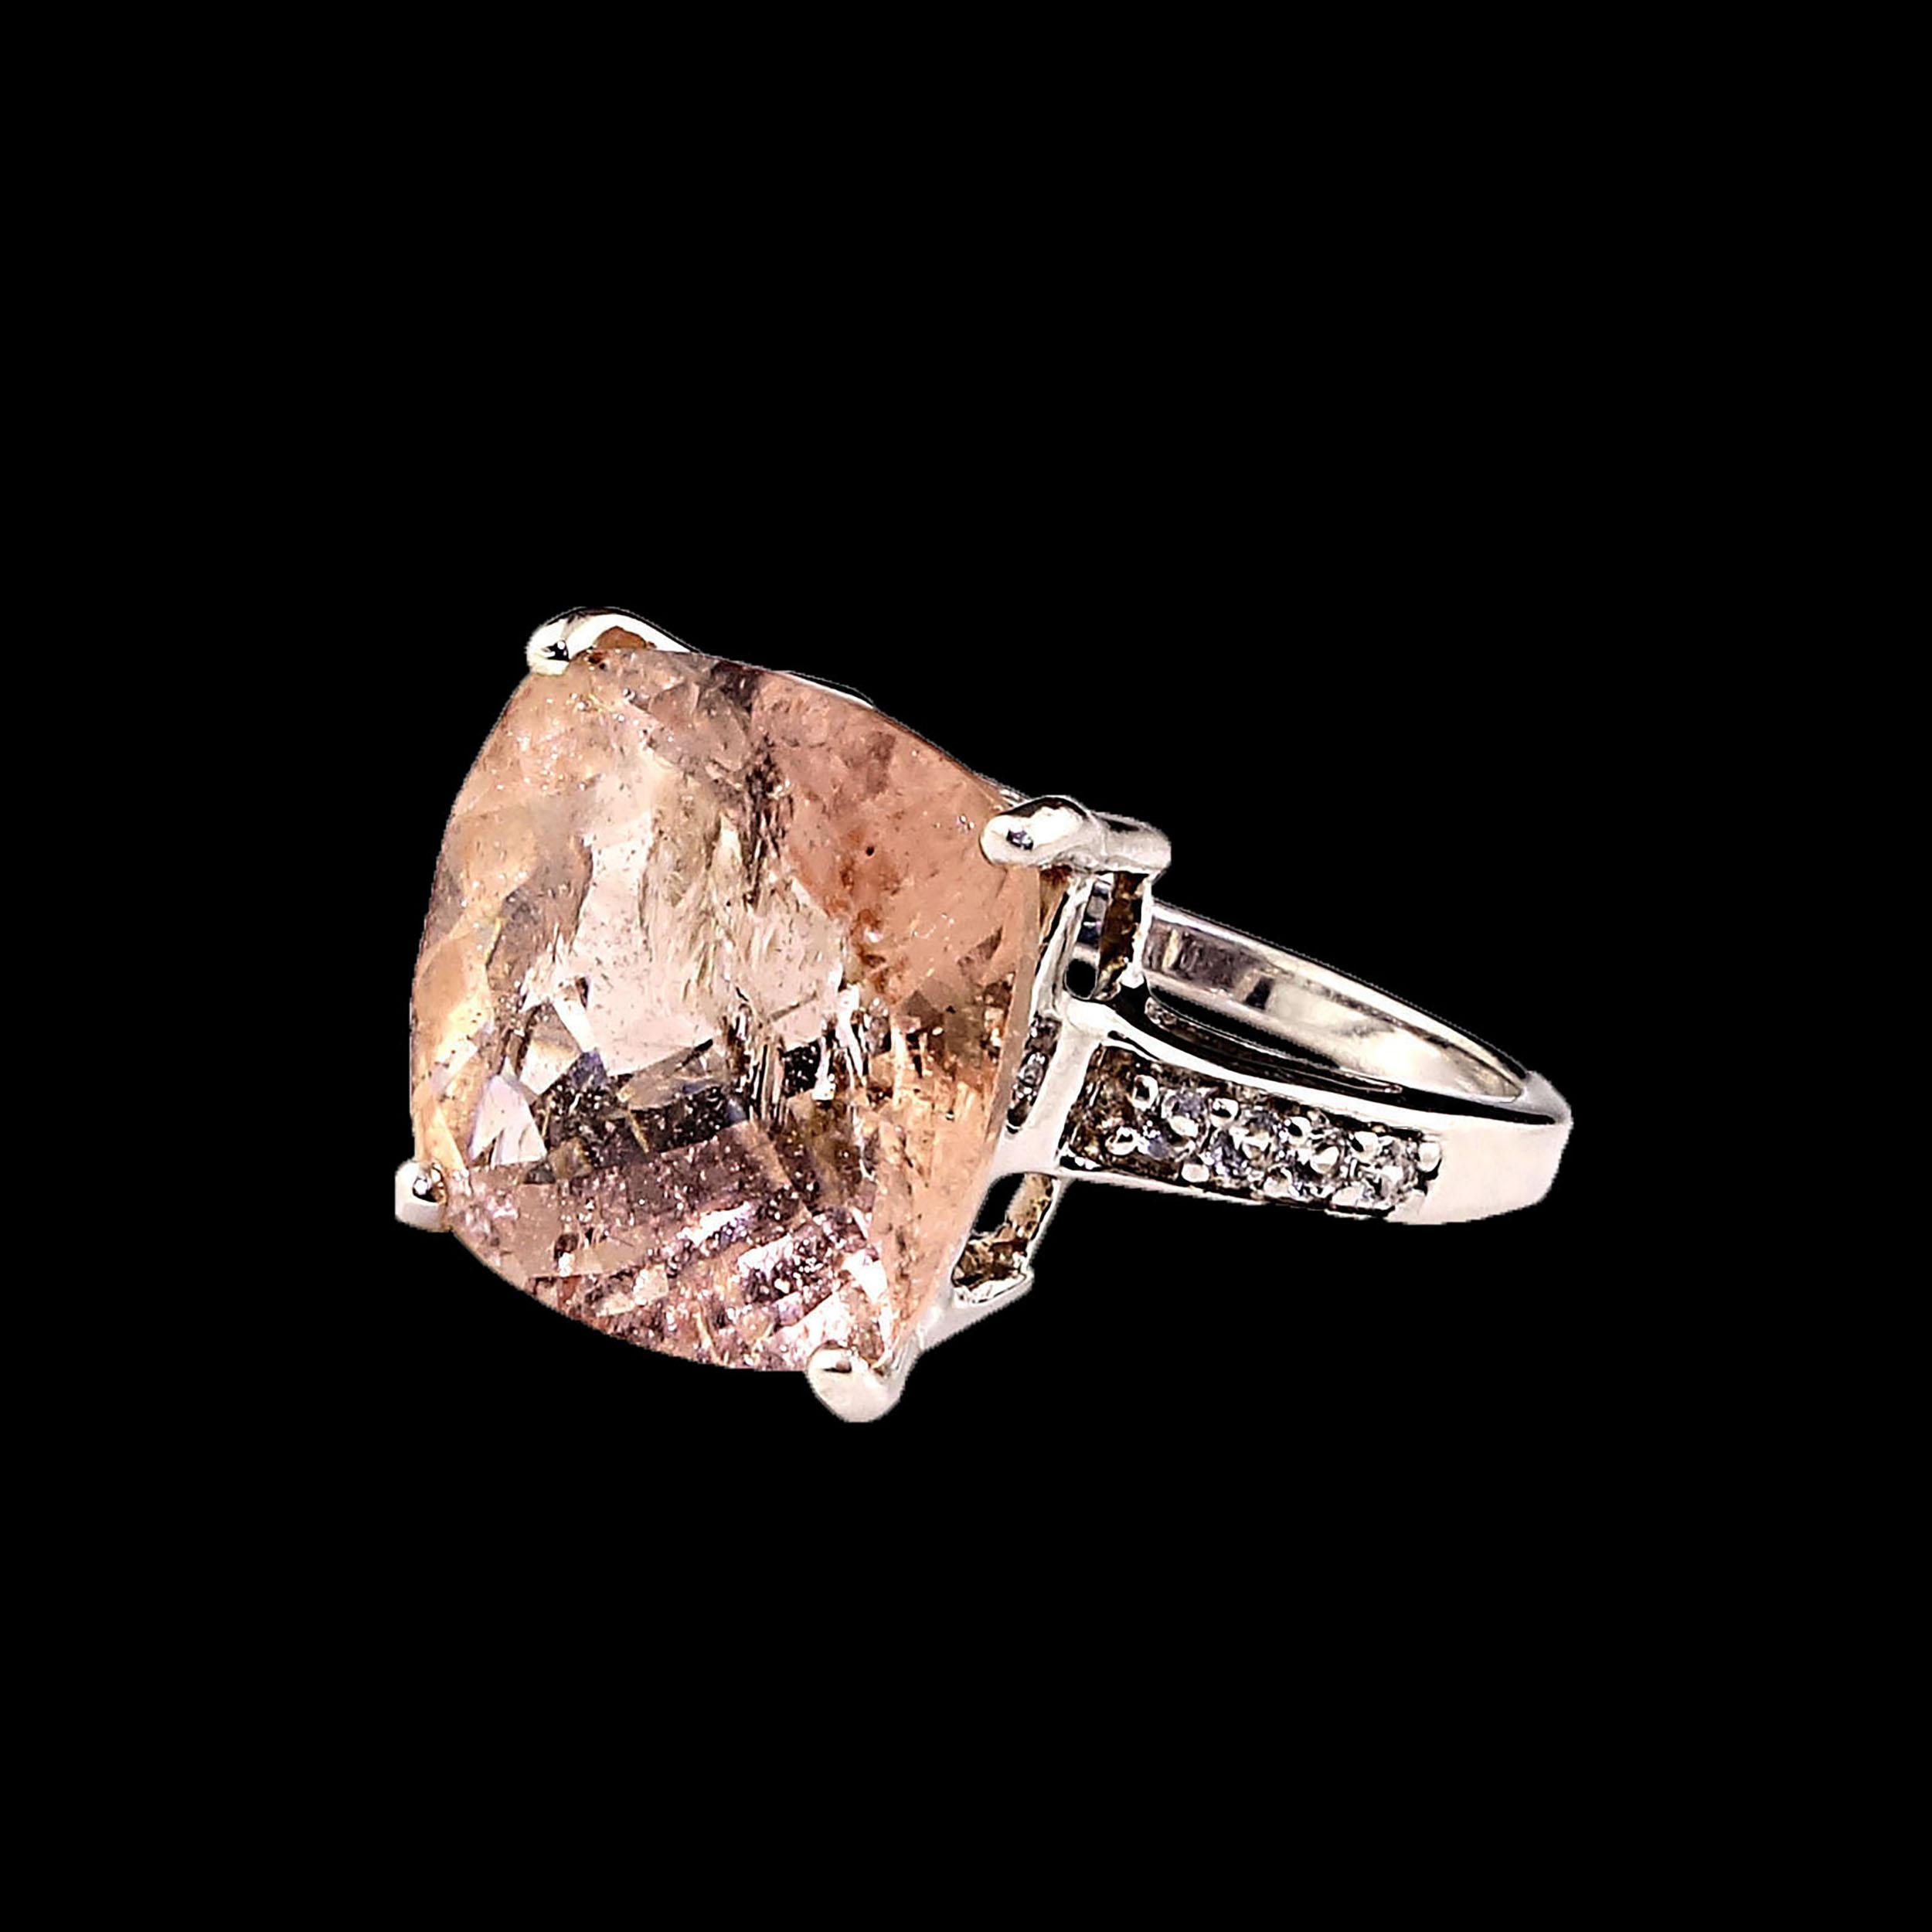 Lovely dinner ring of 8.95 carat cushion cut Morganite in Sterling Silver setting.  This Morganite is peachy in tone and features a checkerboard tabletop.  This gemstone has all the inclusions typical of the beryl family and in many cases these